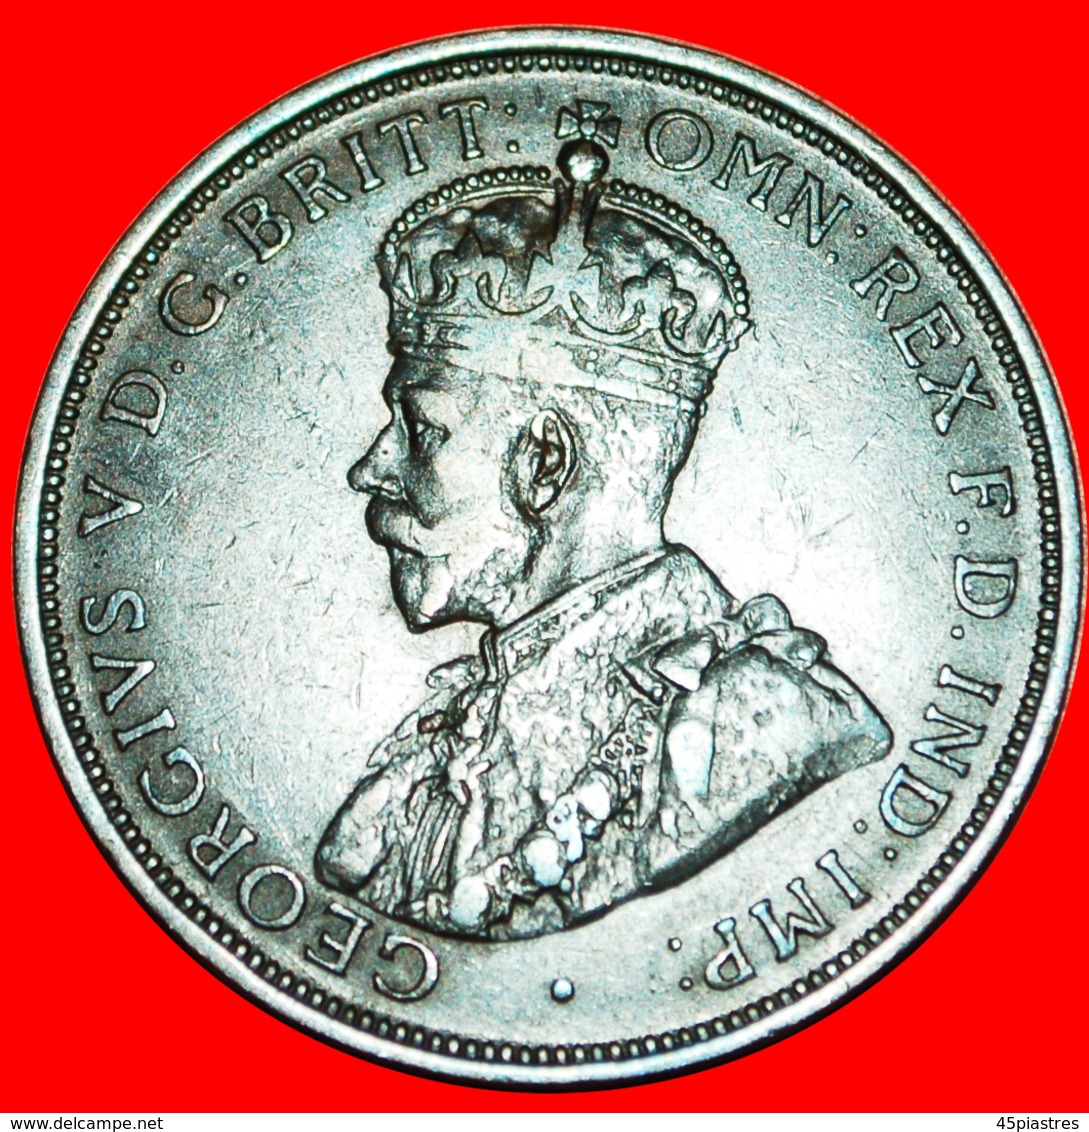 # GREAT BRITAIN: JERSEY ★ NEW TYPE 1/12 SHILLING 1923! LOW START ★ NO RESERVE! George V (1911-1936) - Jersey